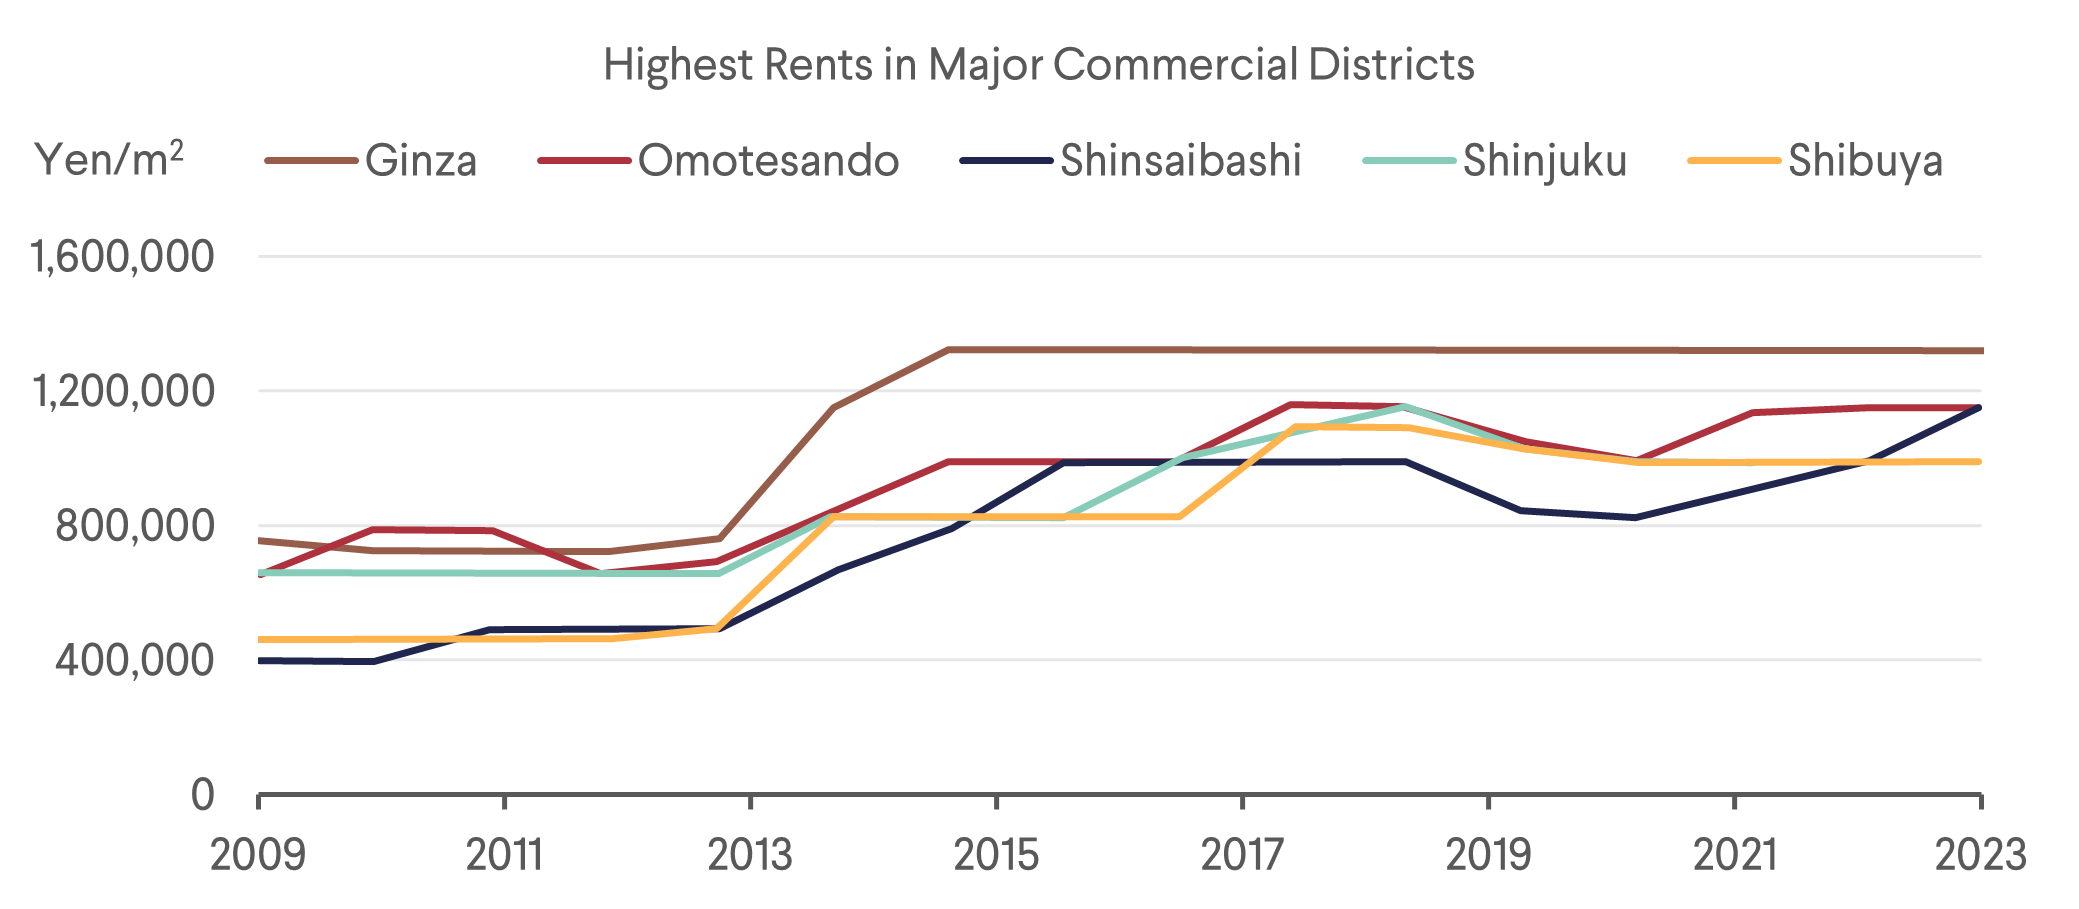 Highest Rents in Major Commercial Districts